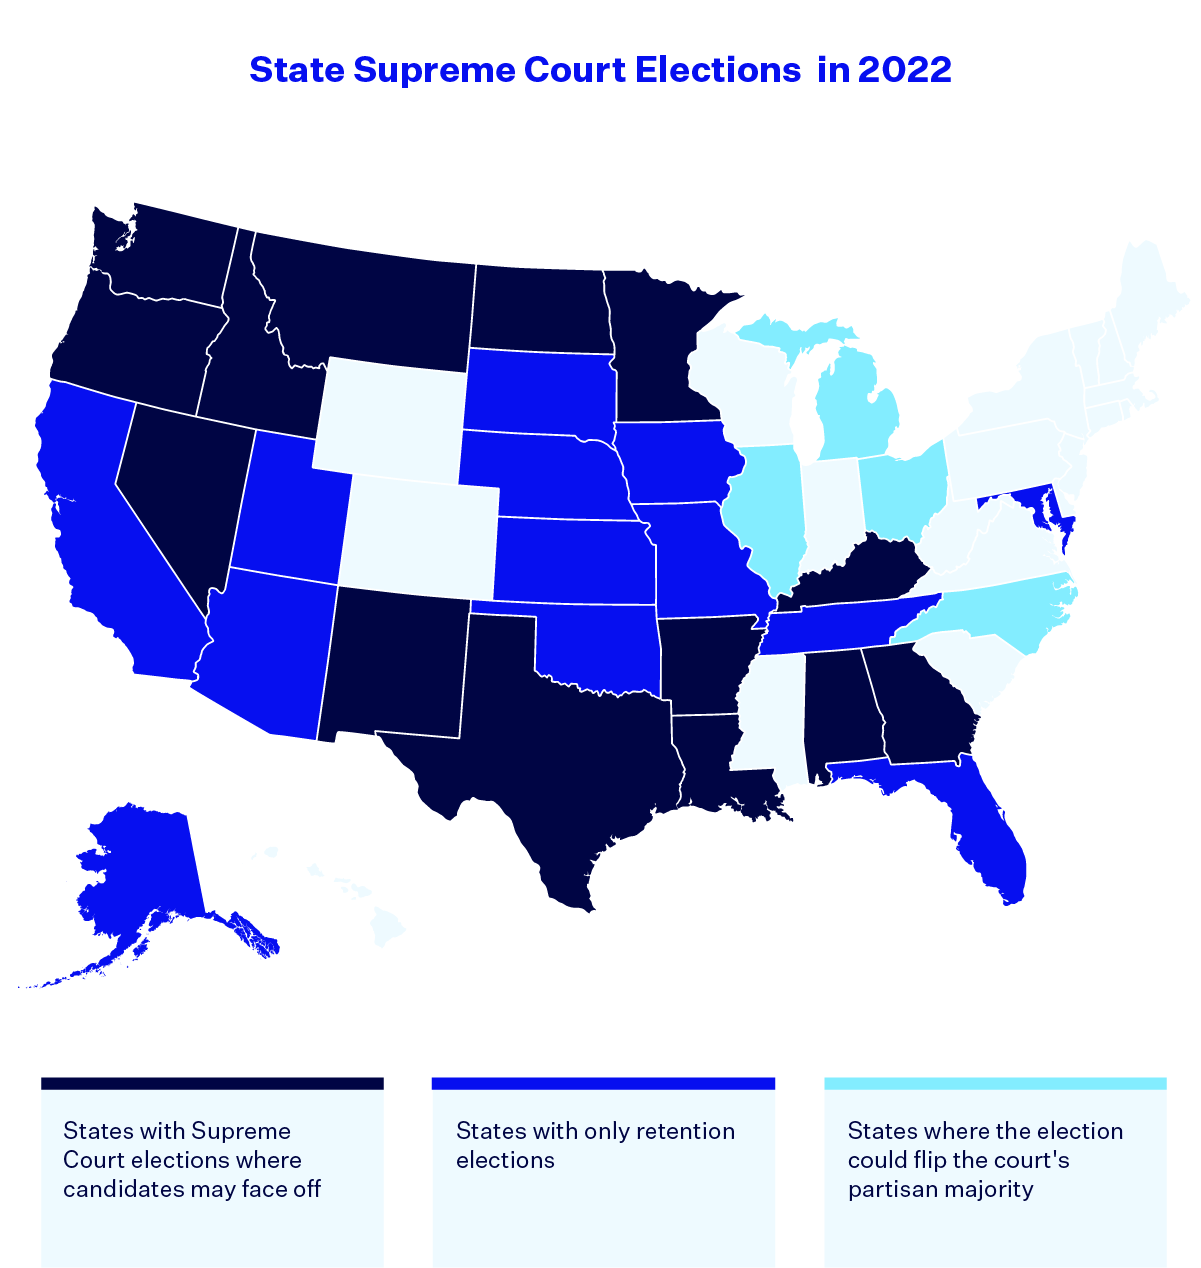 A map of the United States, showing which states have retention elections, which states have contested supreme court elections and the four states (IL, MI, NC, OH) where partisan control of the court could flip.